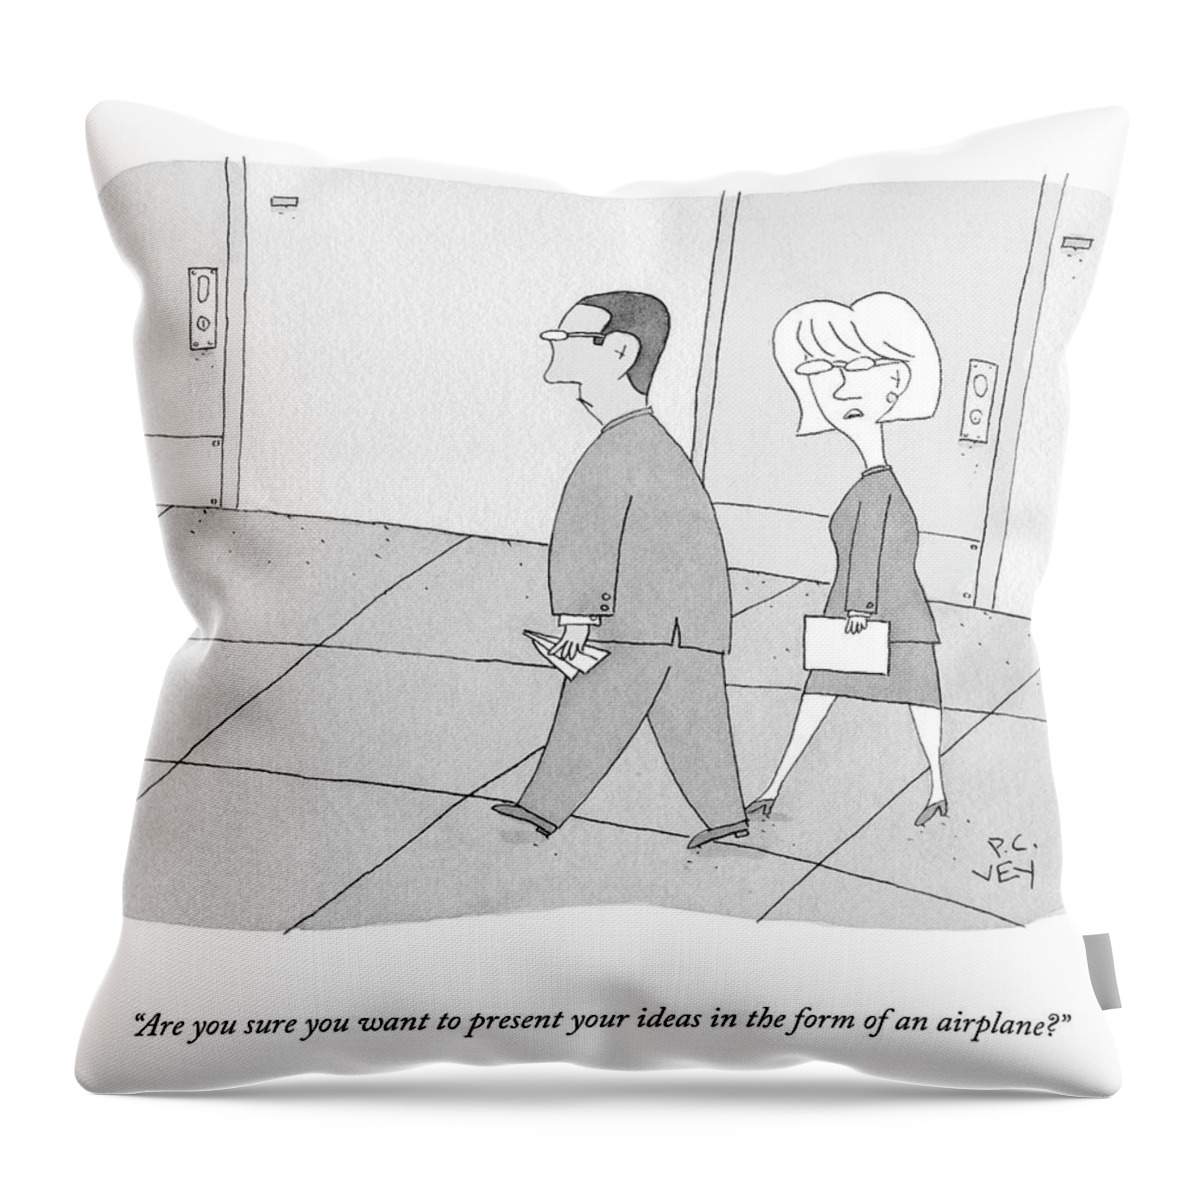 Ideas In The Form Of An Airplane Throw Pillow